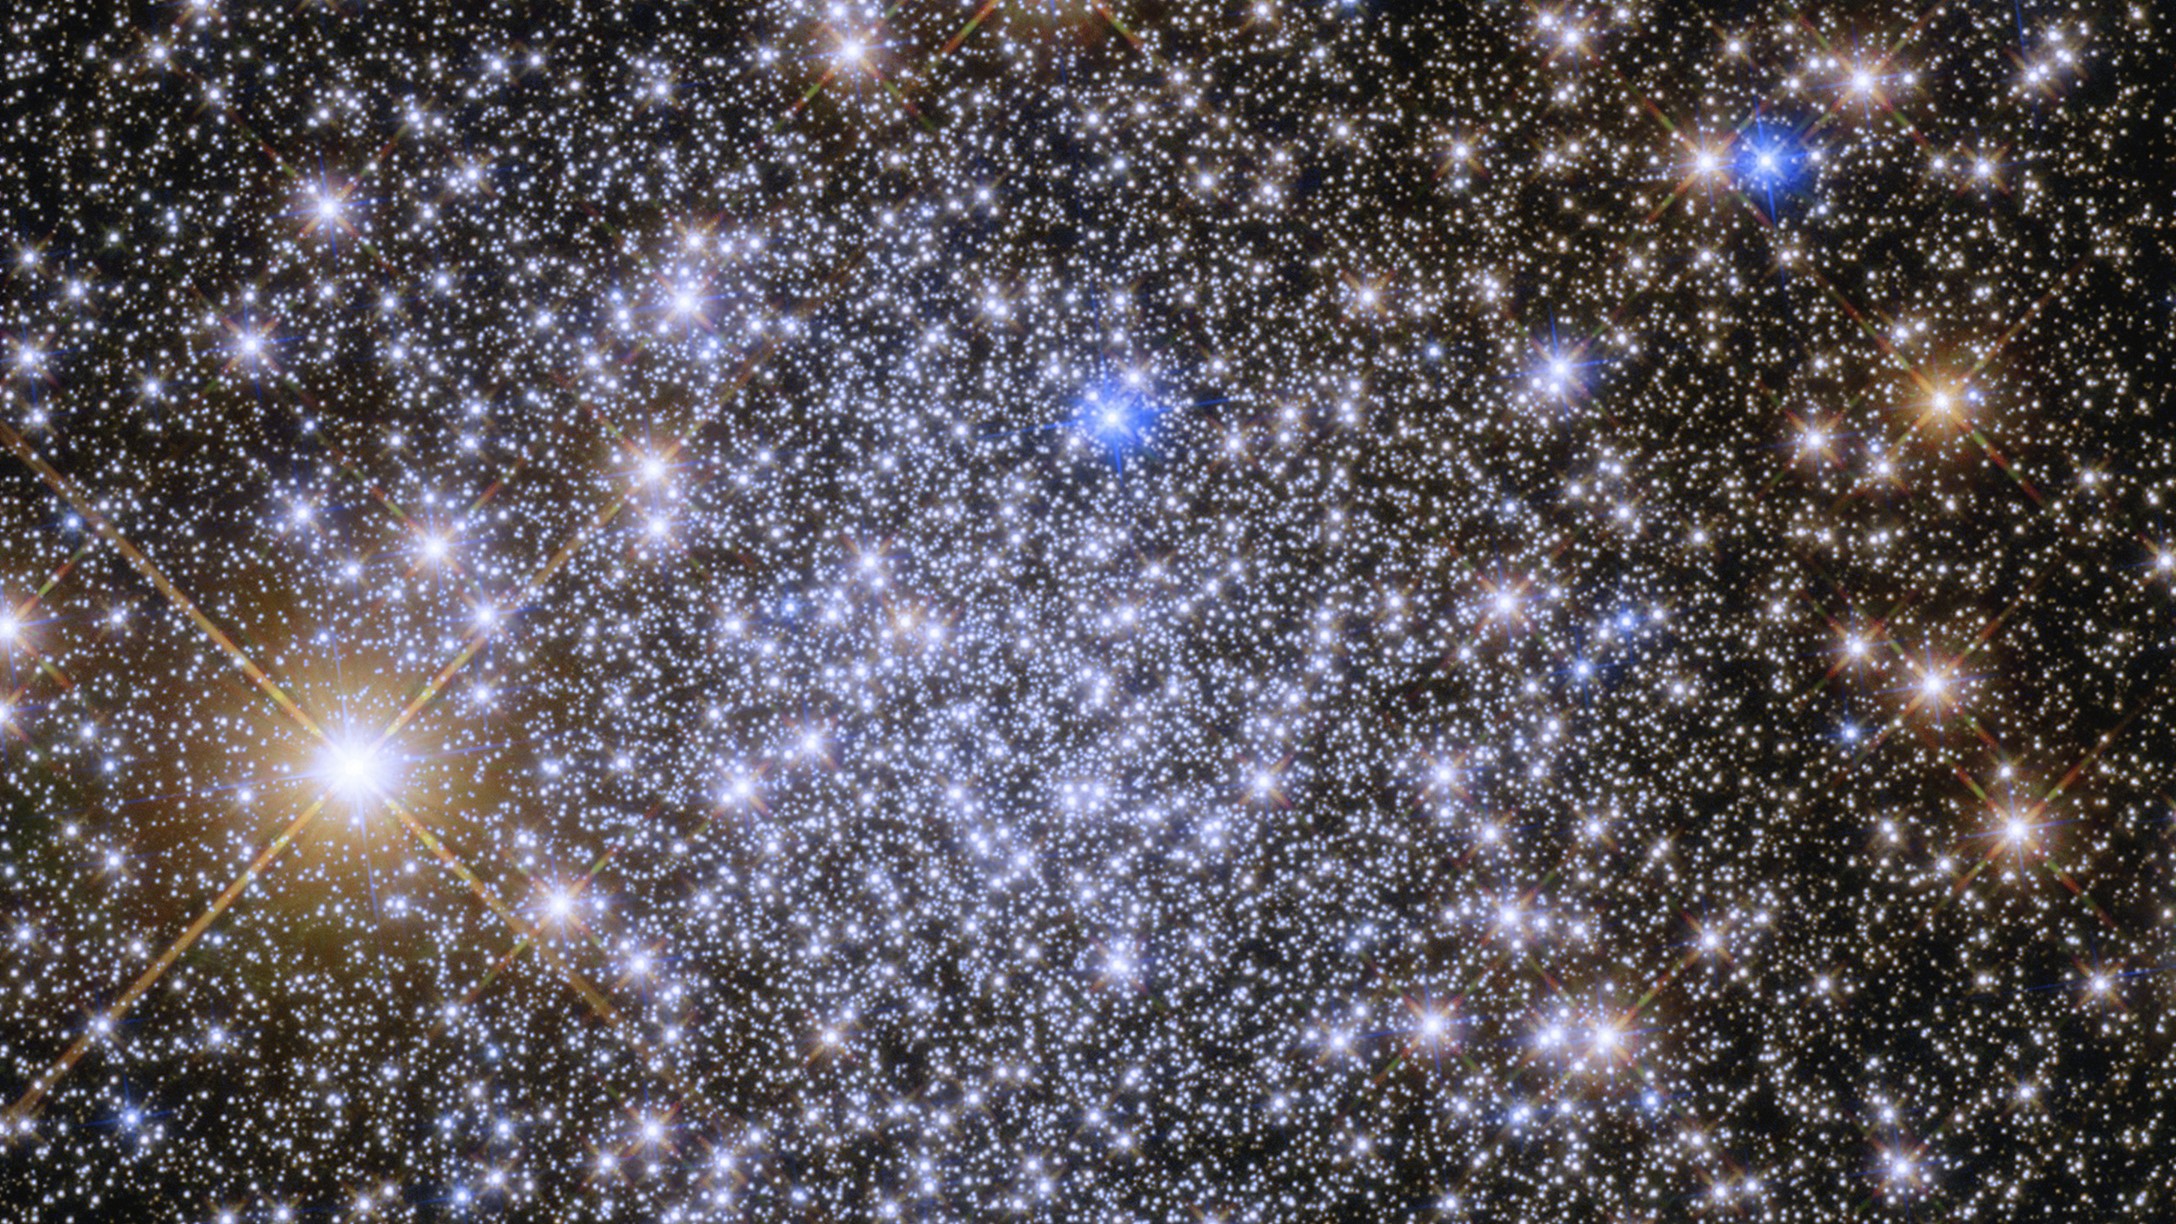 Sparkling Hubble Space Telescope photo shows ancient globular cluster near Milky Way's heart